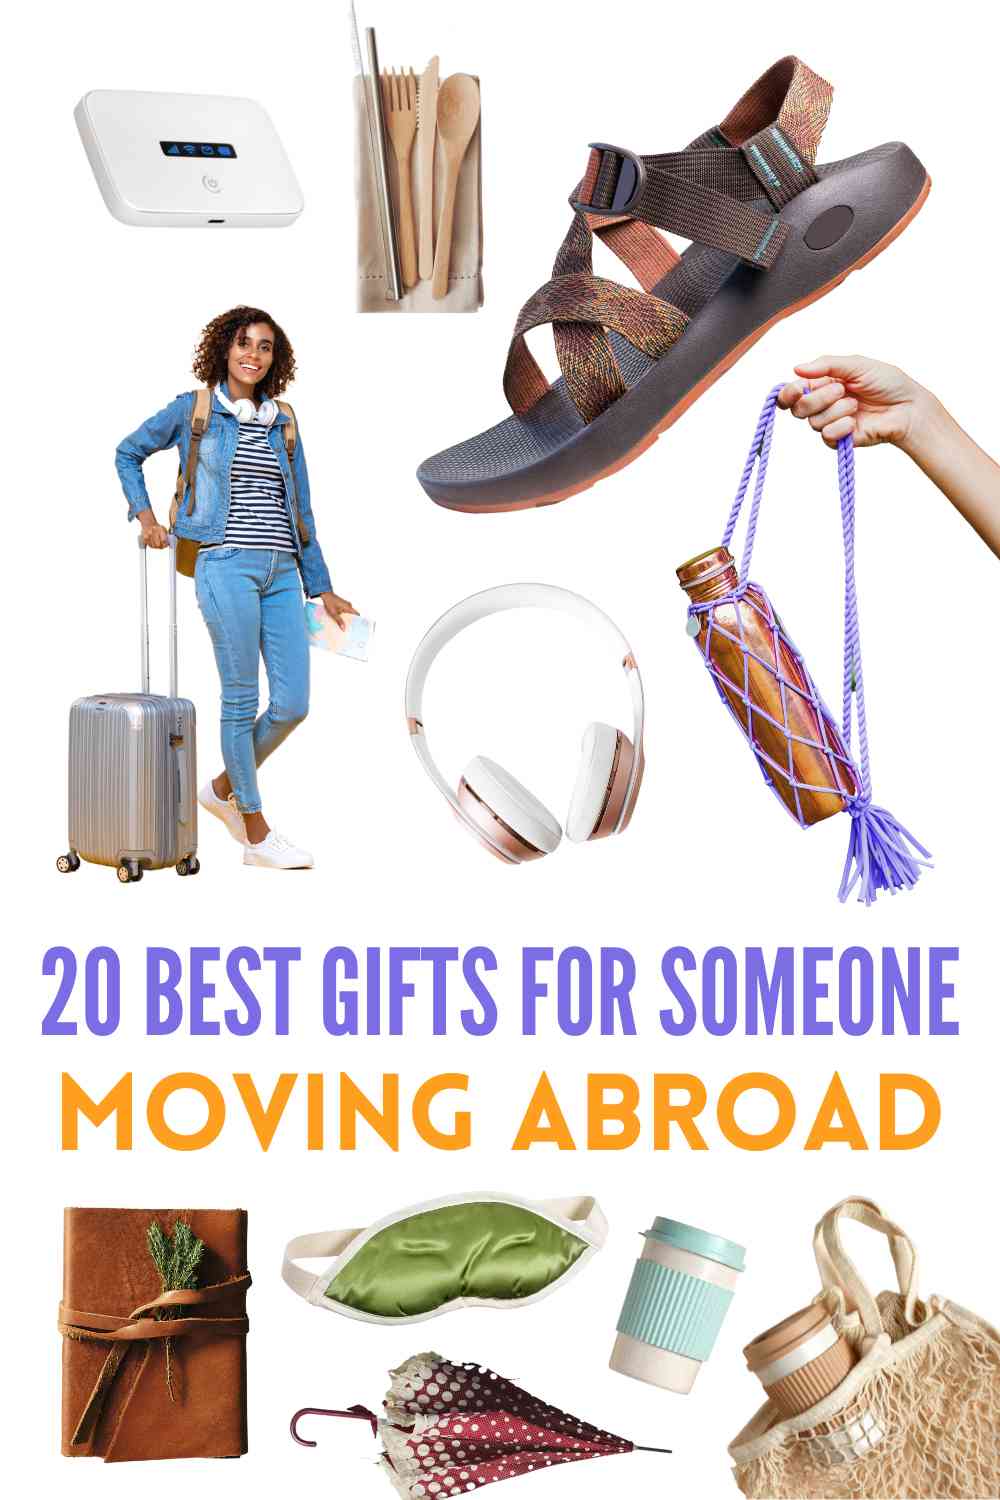 What is the best thing to gift someone who is going abroad? - Quora